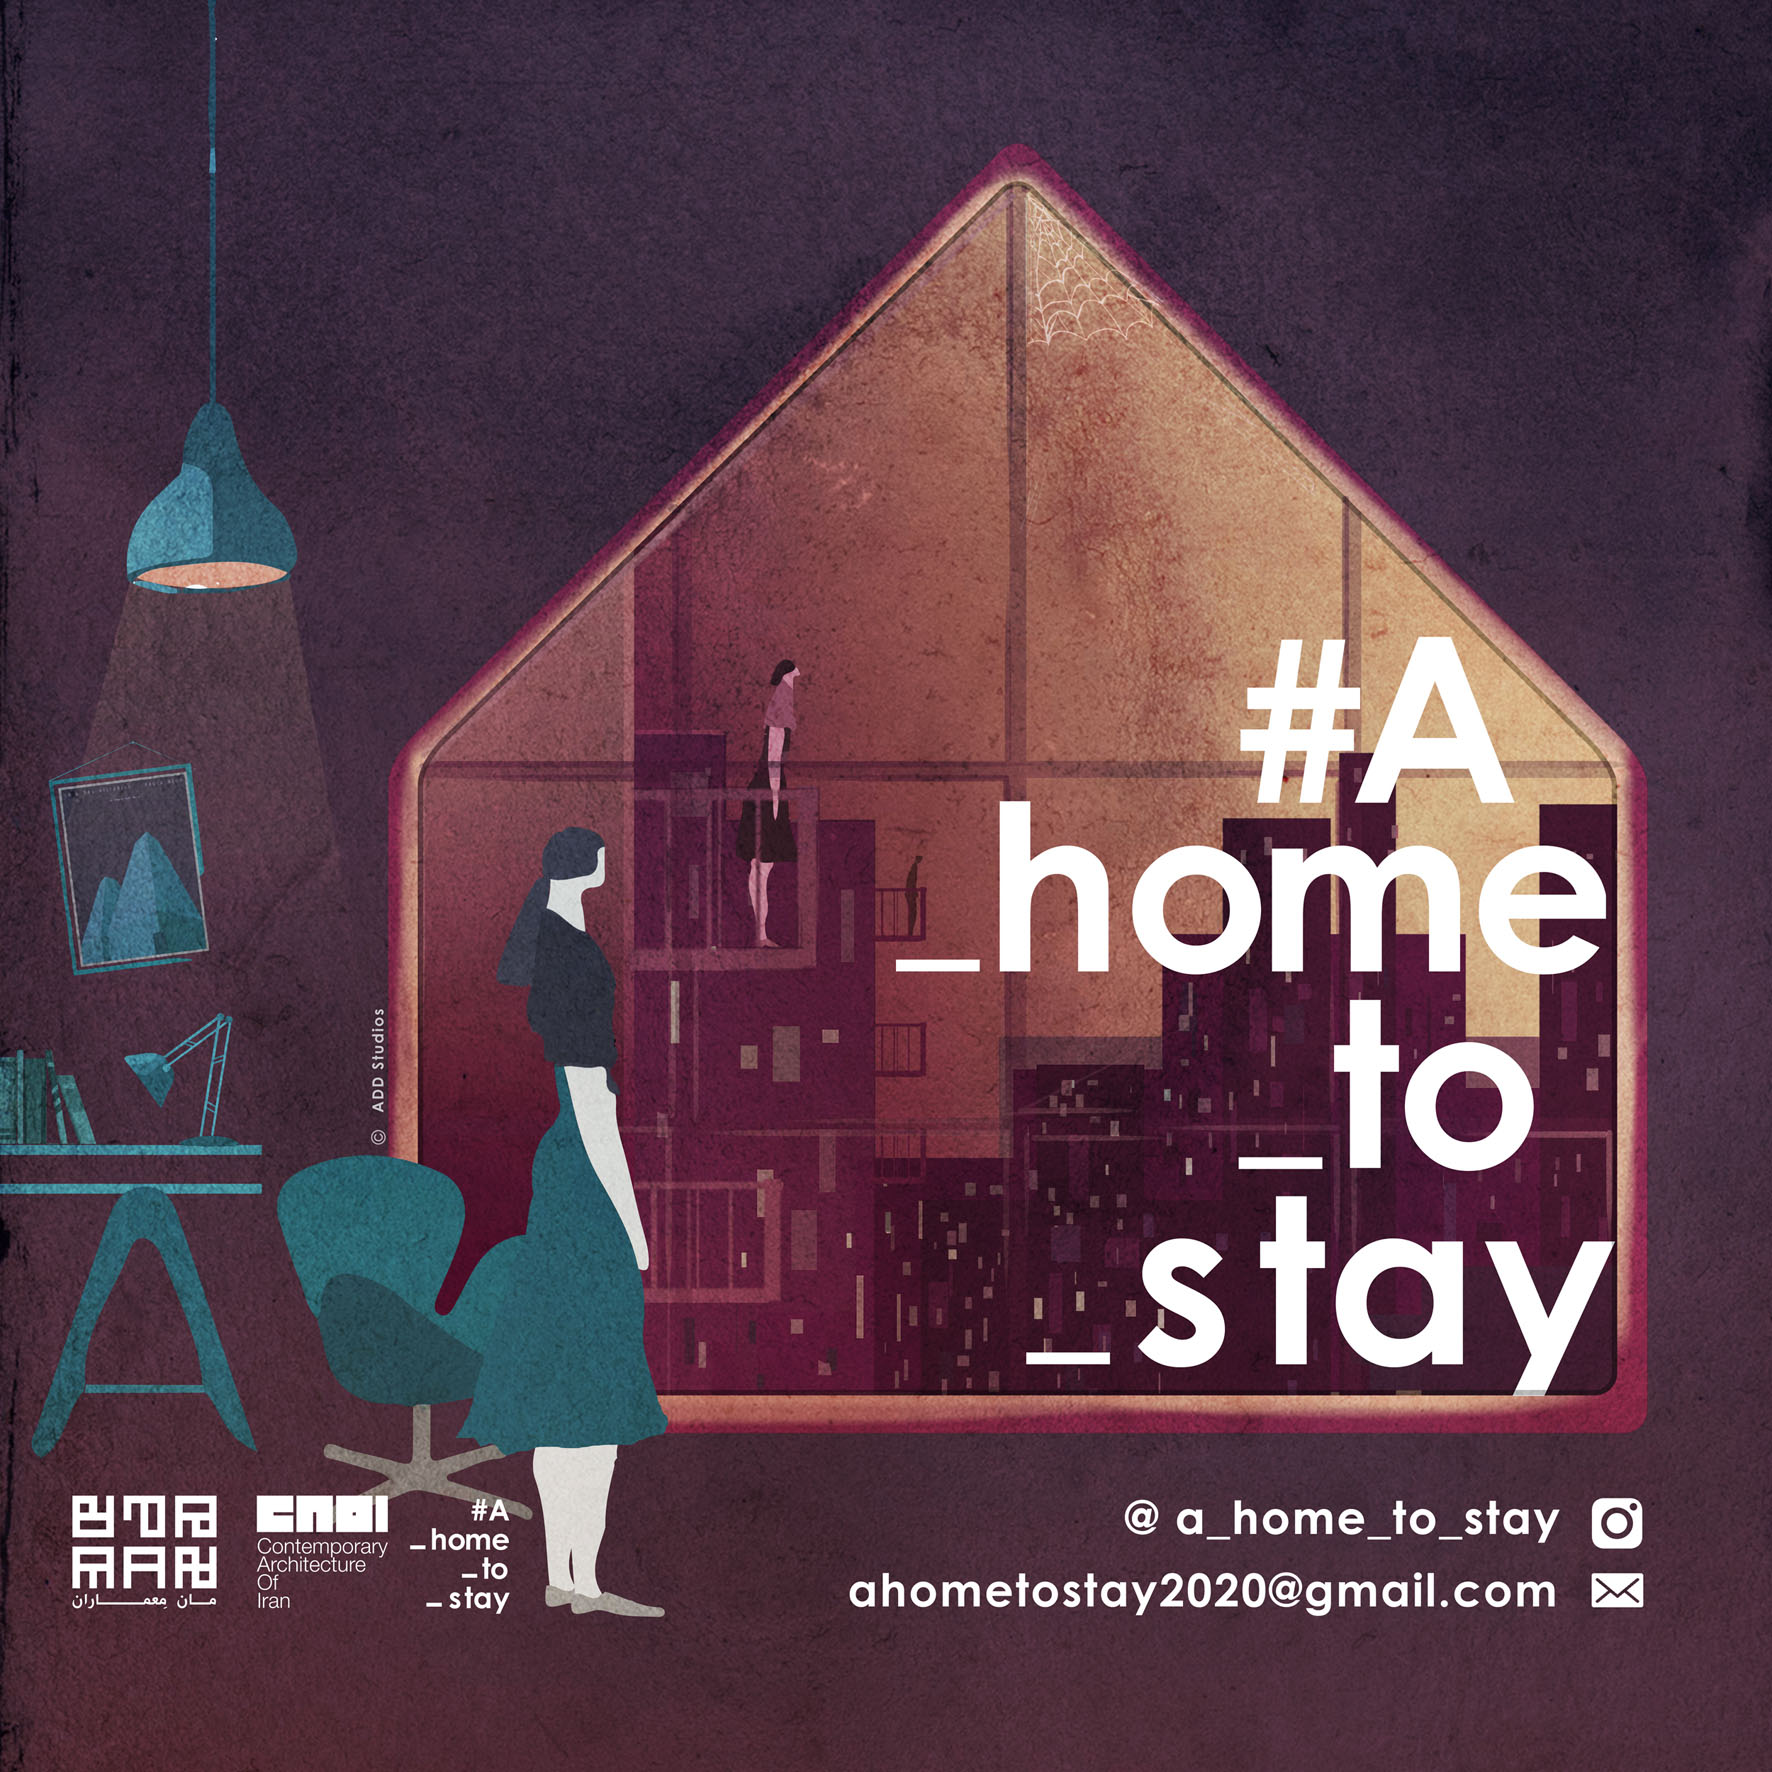 Campaign of A home to stay